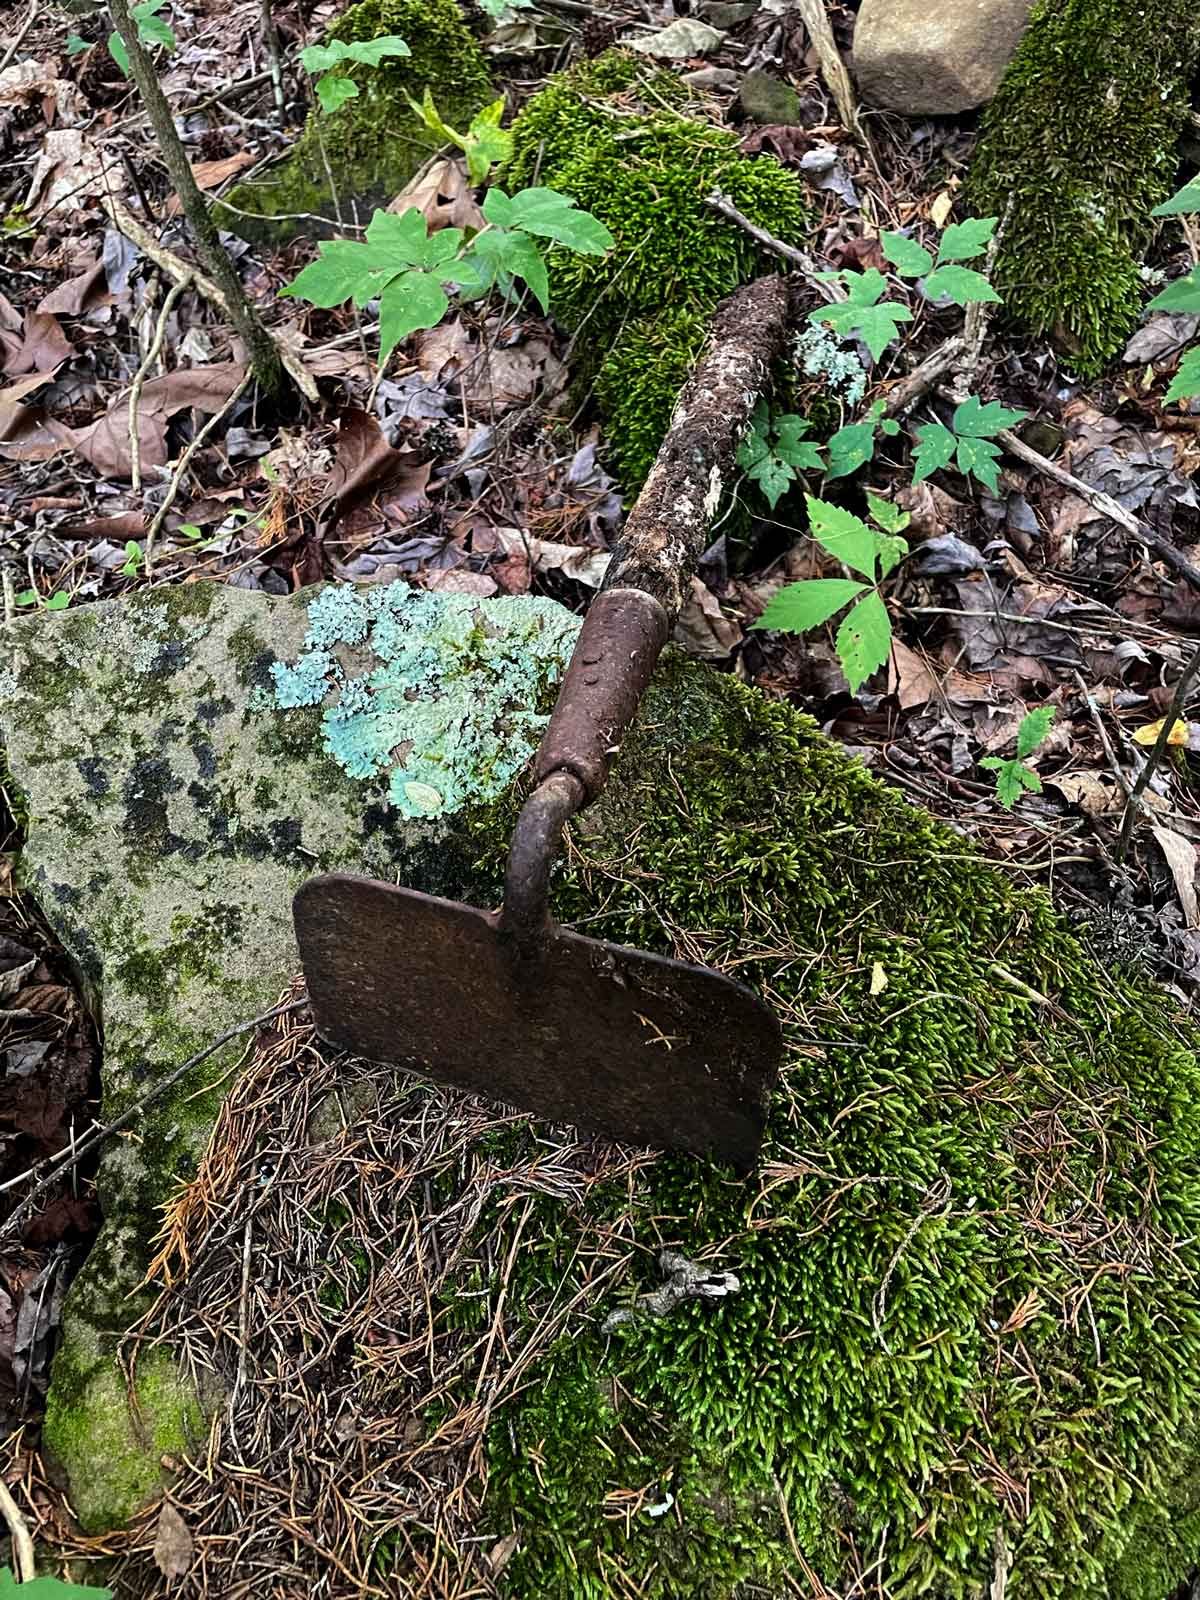 An old hoe forgotten on a mossy rock has weathered a few changing of the seasons.